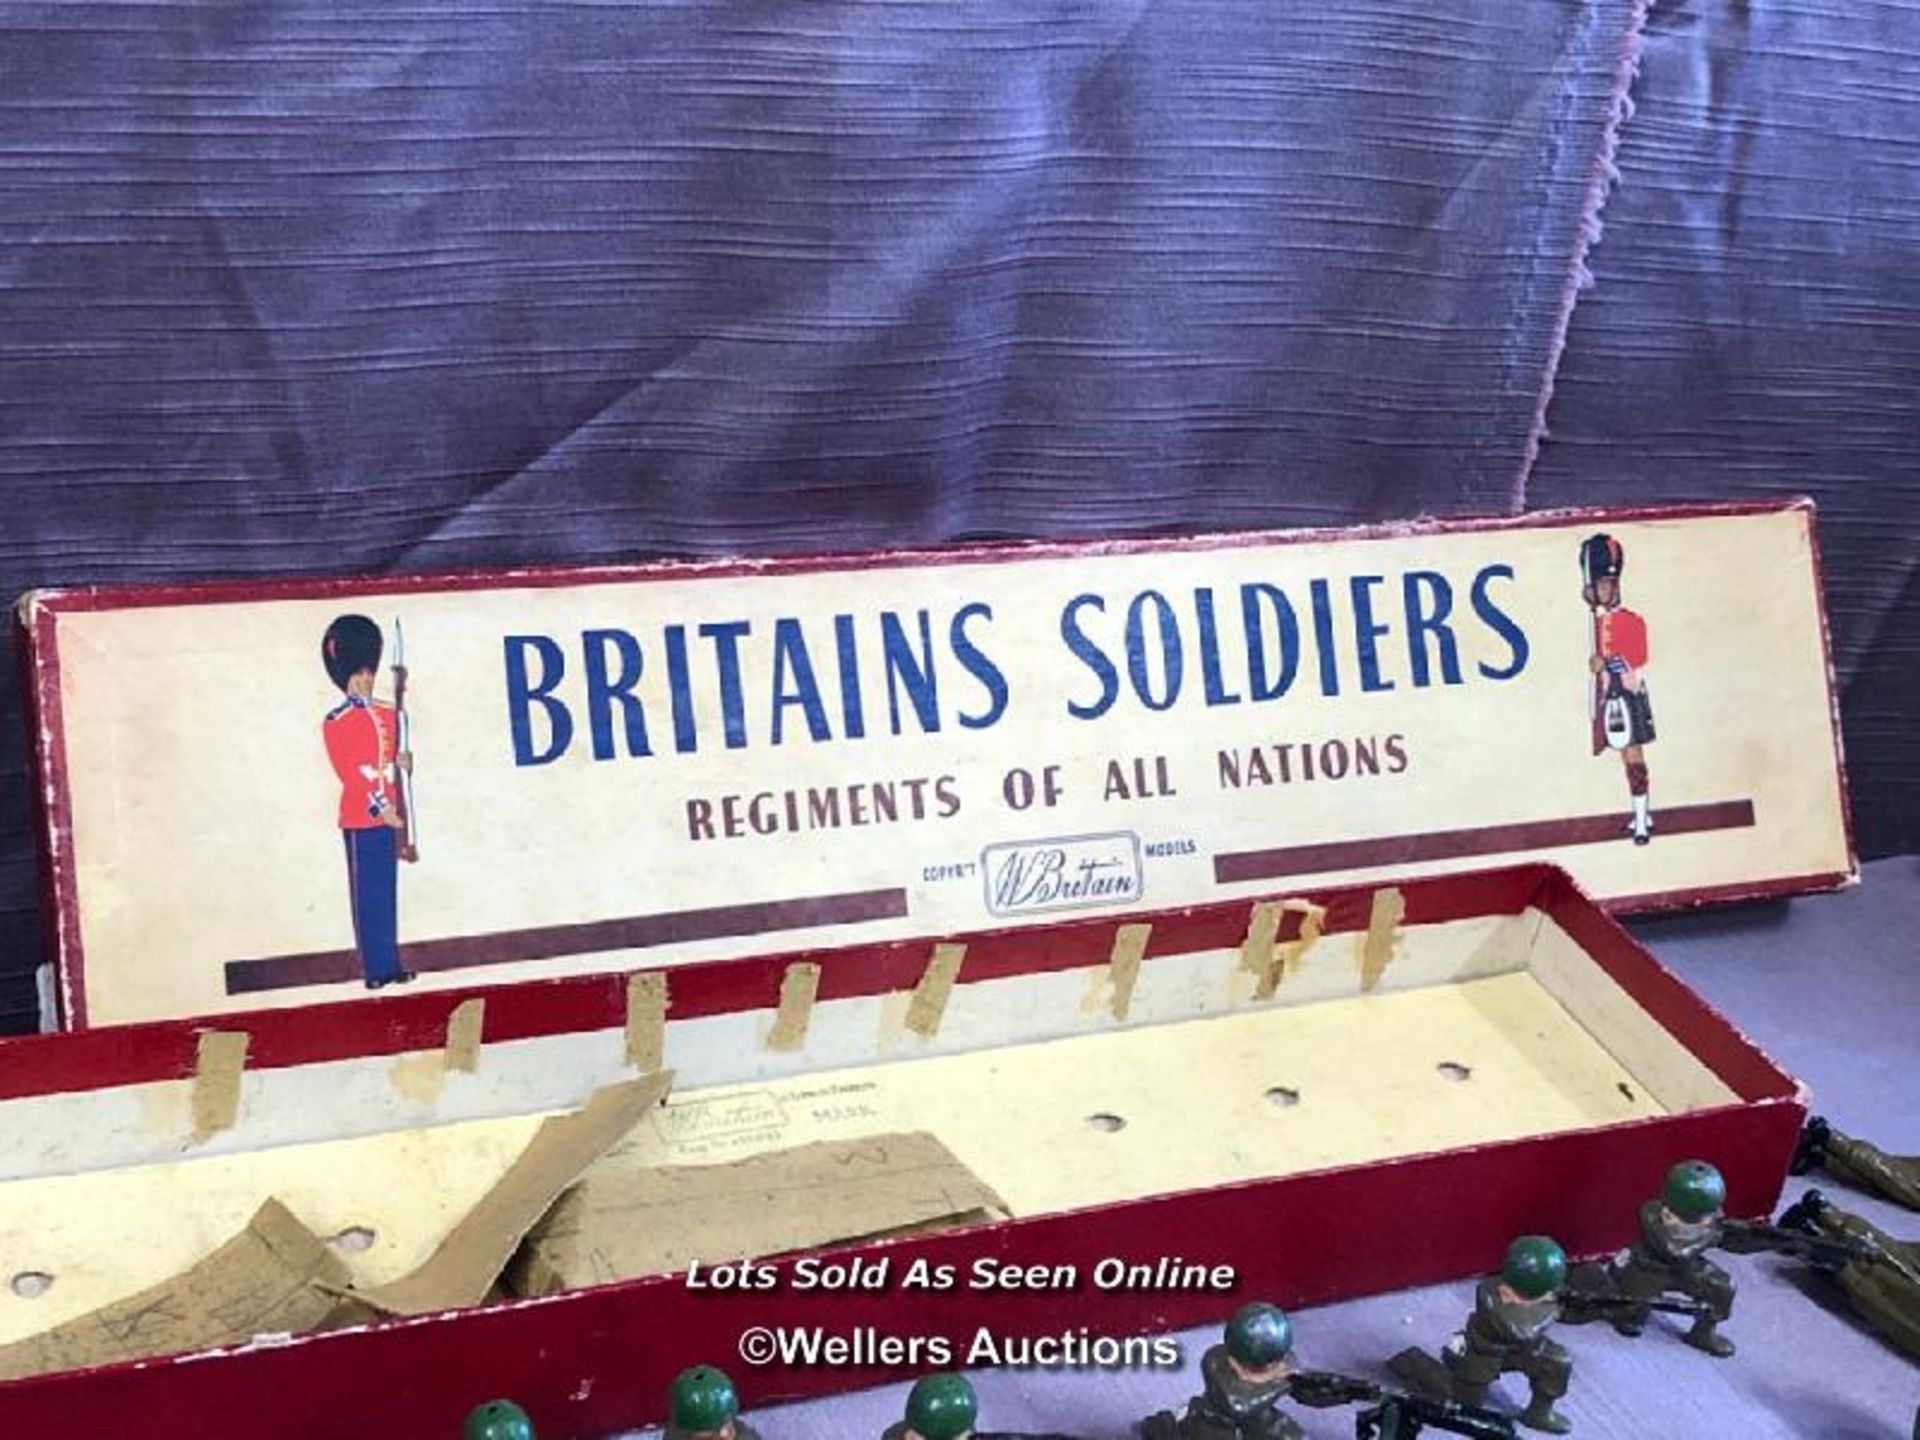 BRITAINS SOLDIERS REGIMENTS OF ALL NATIONS, WITH A NON MATCHING BOX NO. 2063 THE ARGYLL AND - Image 6 of 6